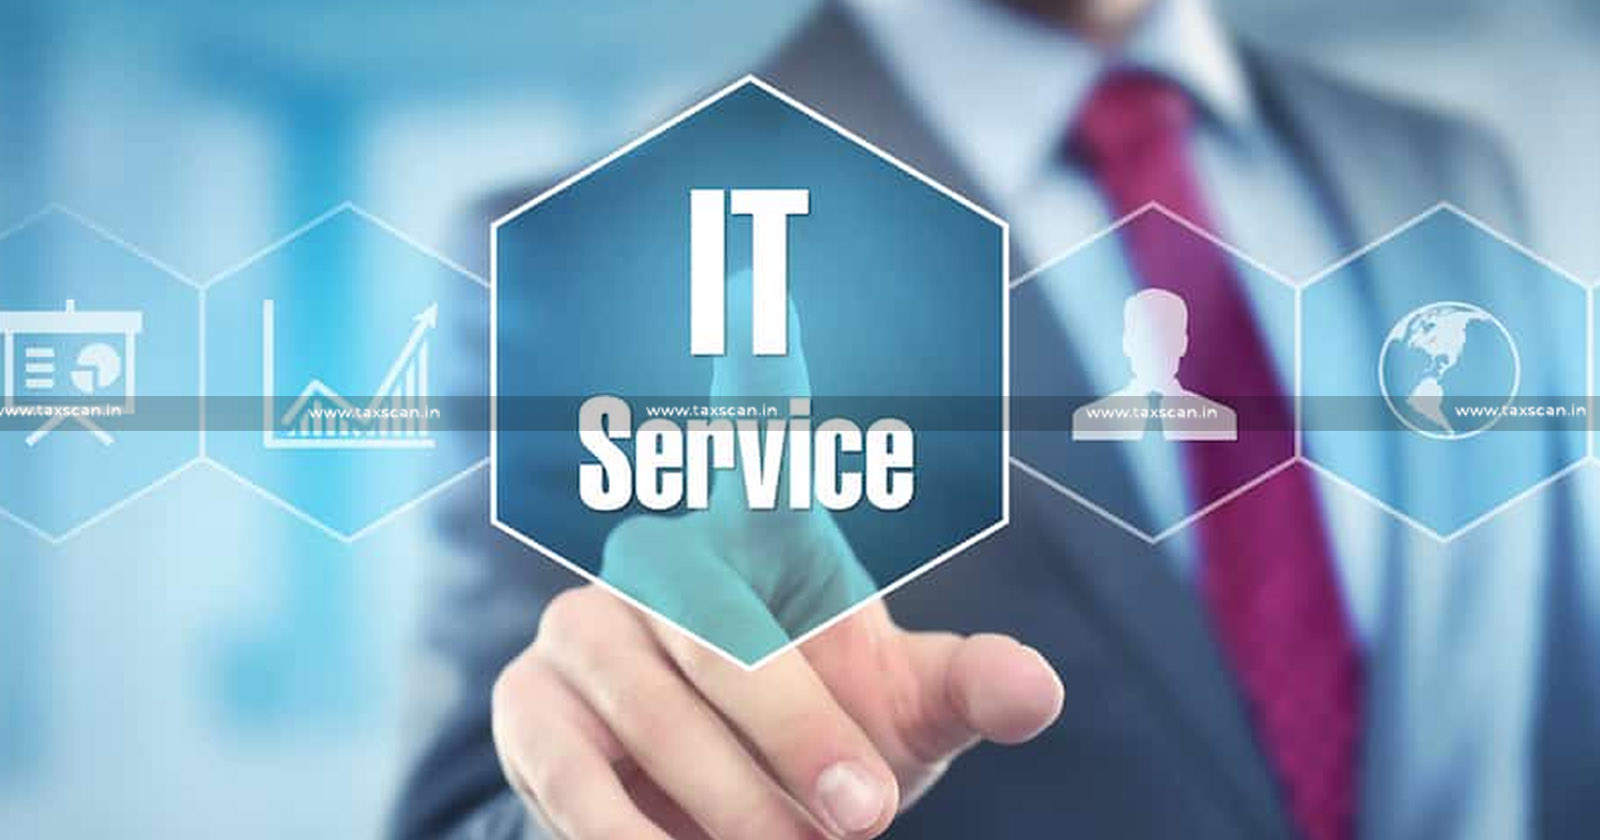 Income earned from providing - IT services to Indian customers is taxable India due - service in India - ITAT - TAXSCAN